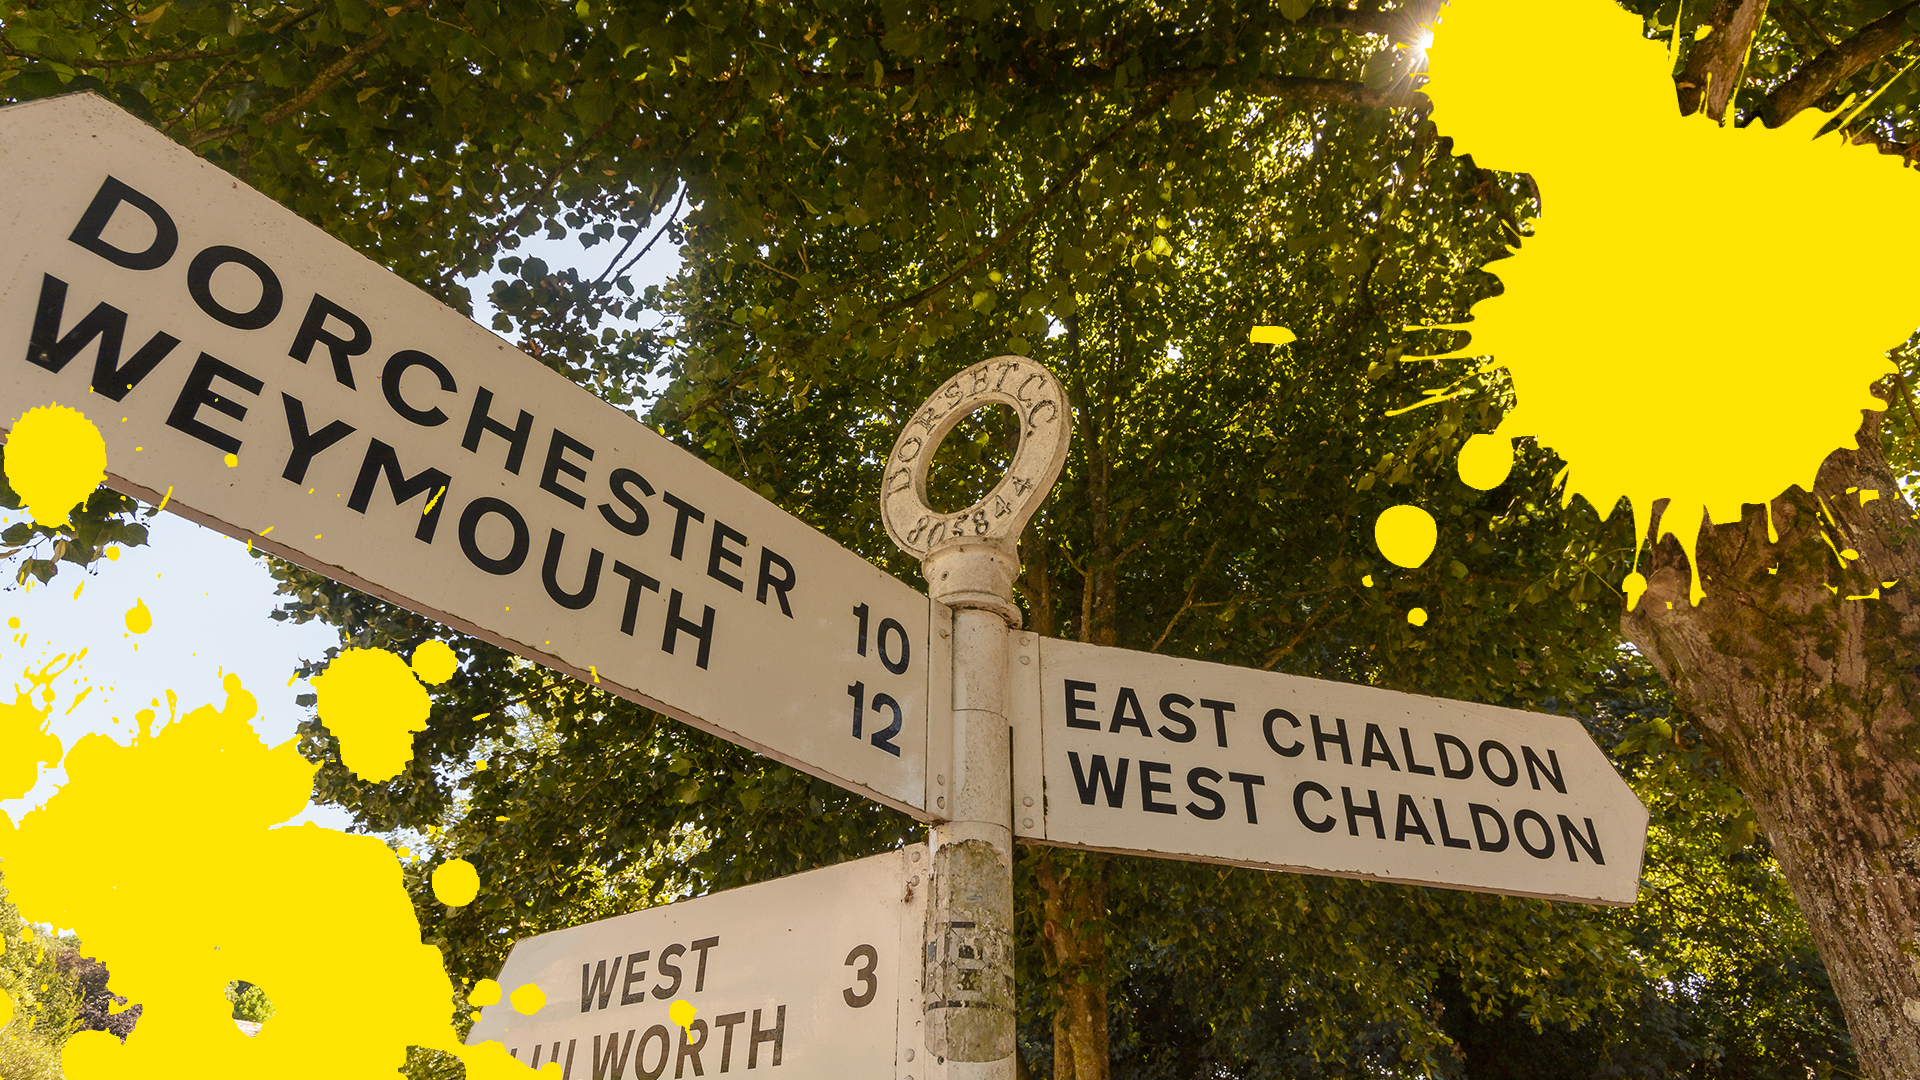 Road signs with yellow splat